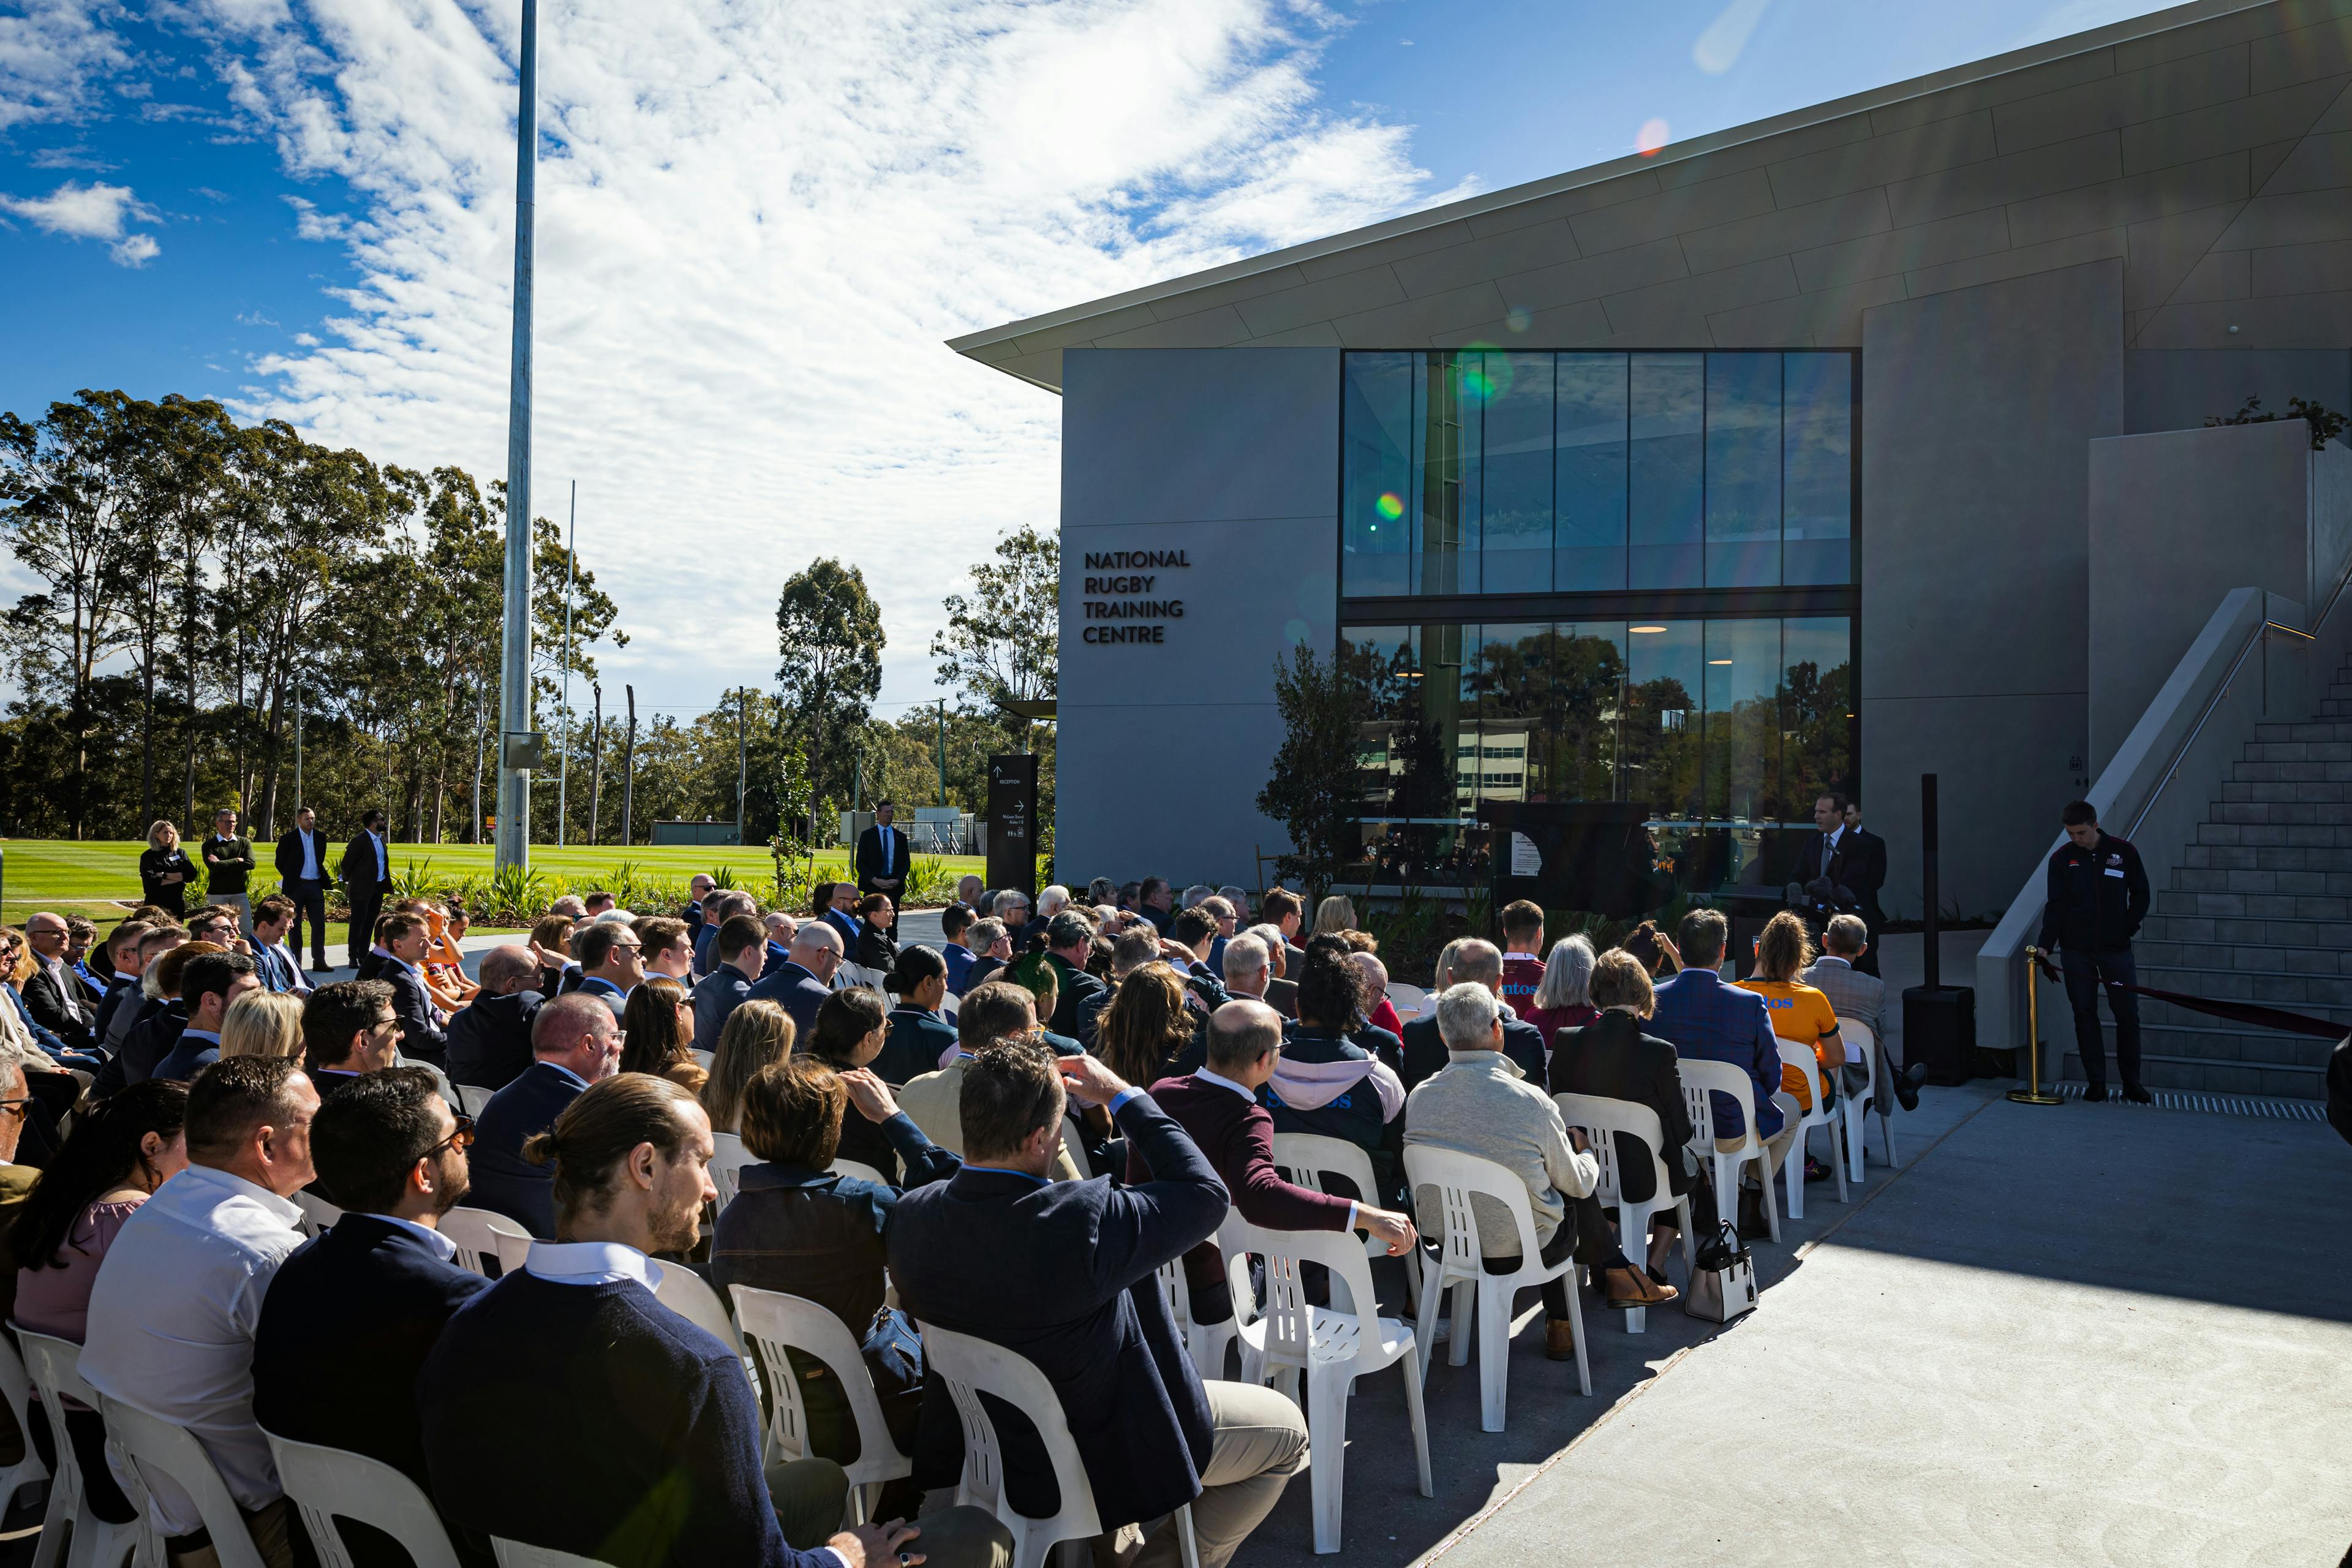 The opening of the new site at Ballymore. Photo: Brenden Hertel/RA Media